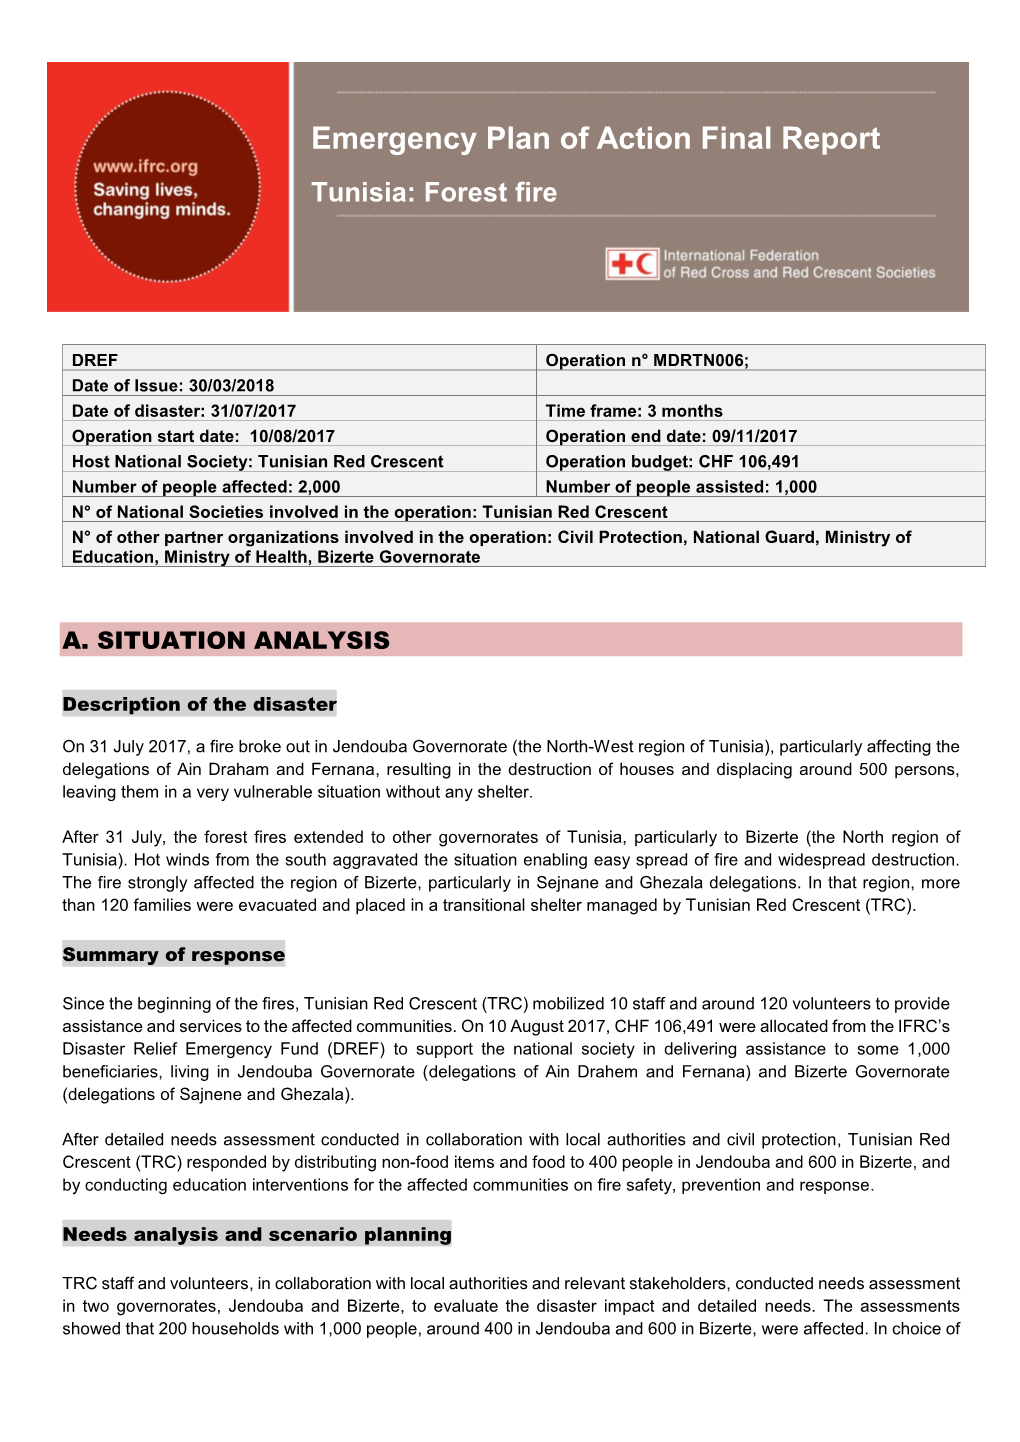 Emergency Plan of Action Final Report Tunisia: Forest Fire